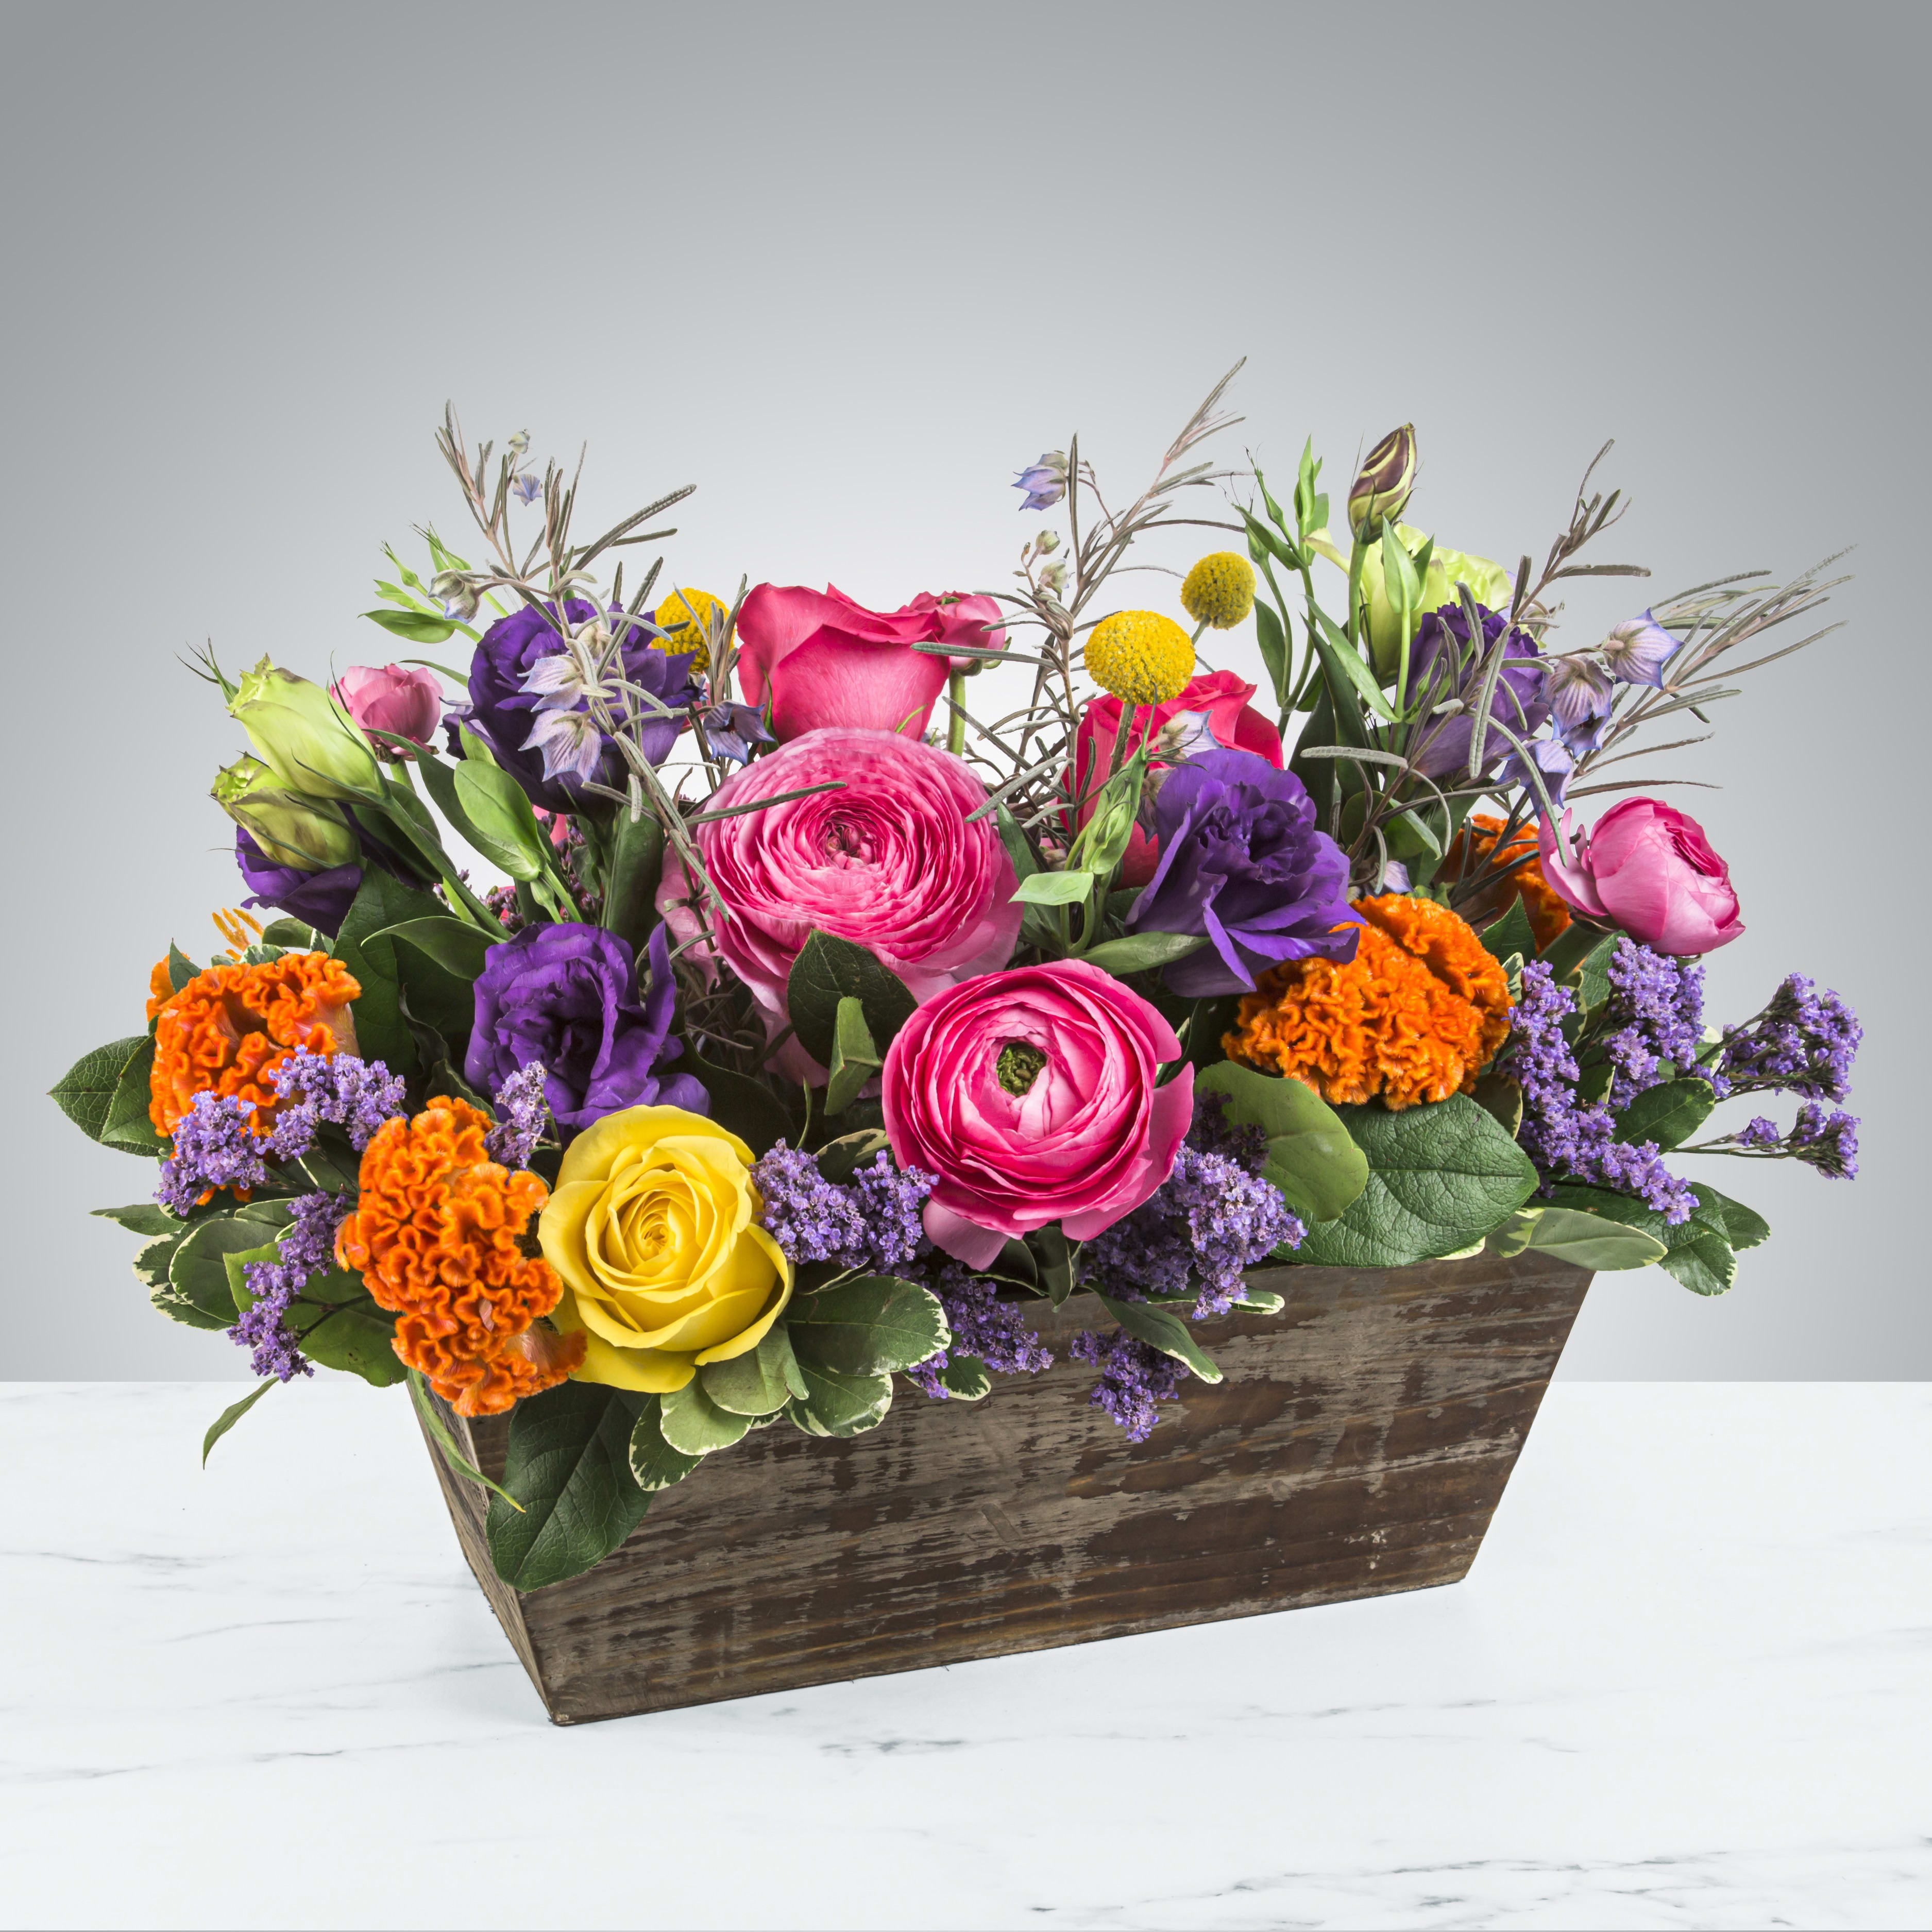 Groovy by BloomNation™ - Keep things fun with this jewel toned flower box! Ranunculus, roses, and lisianthus in a wooden garden box give this arrangement its bright colors and textures to create a beautiful centerpiece or gift.      APPROXIMATE DIMENSIONS 18&quot; W X 10&quot; H